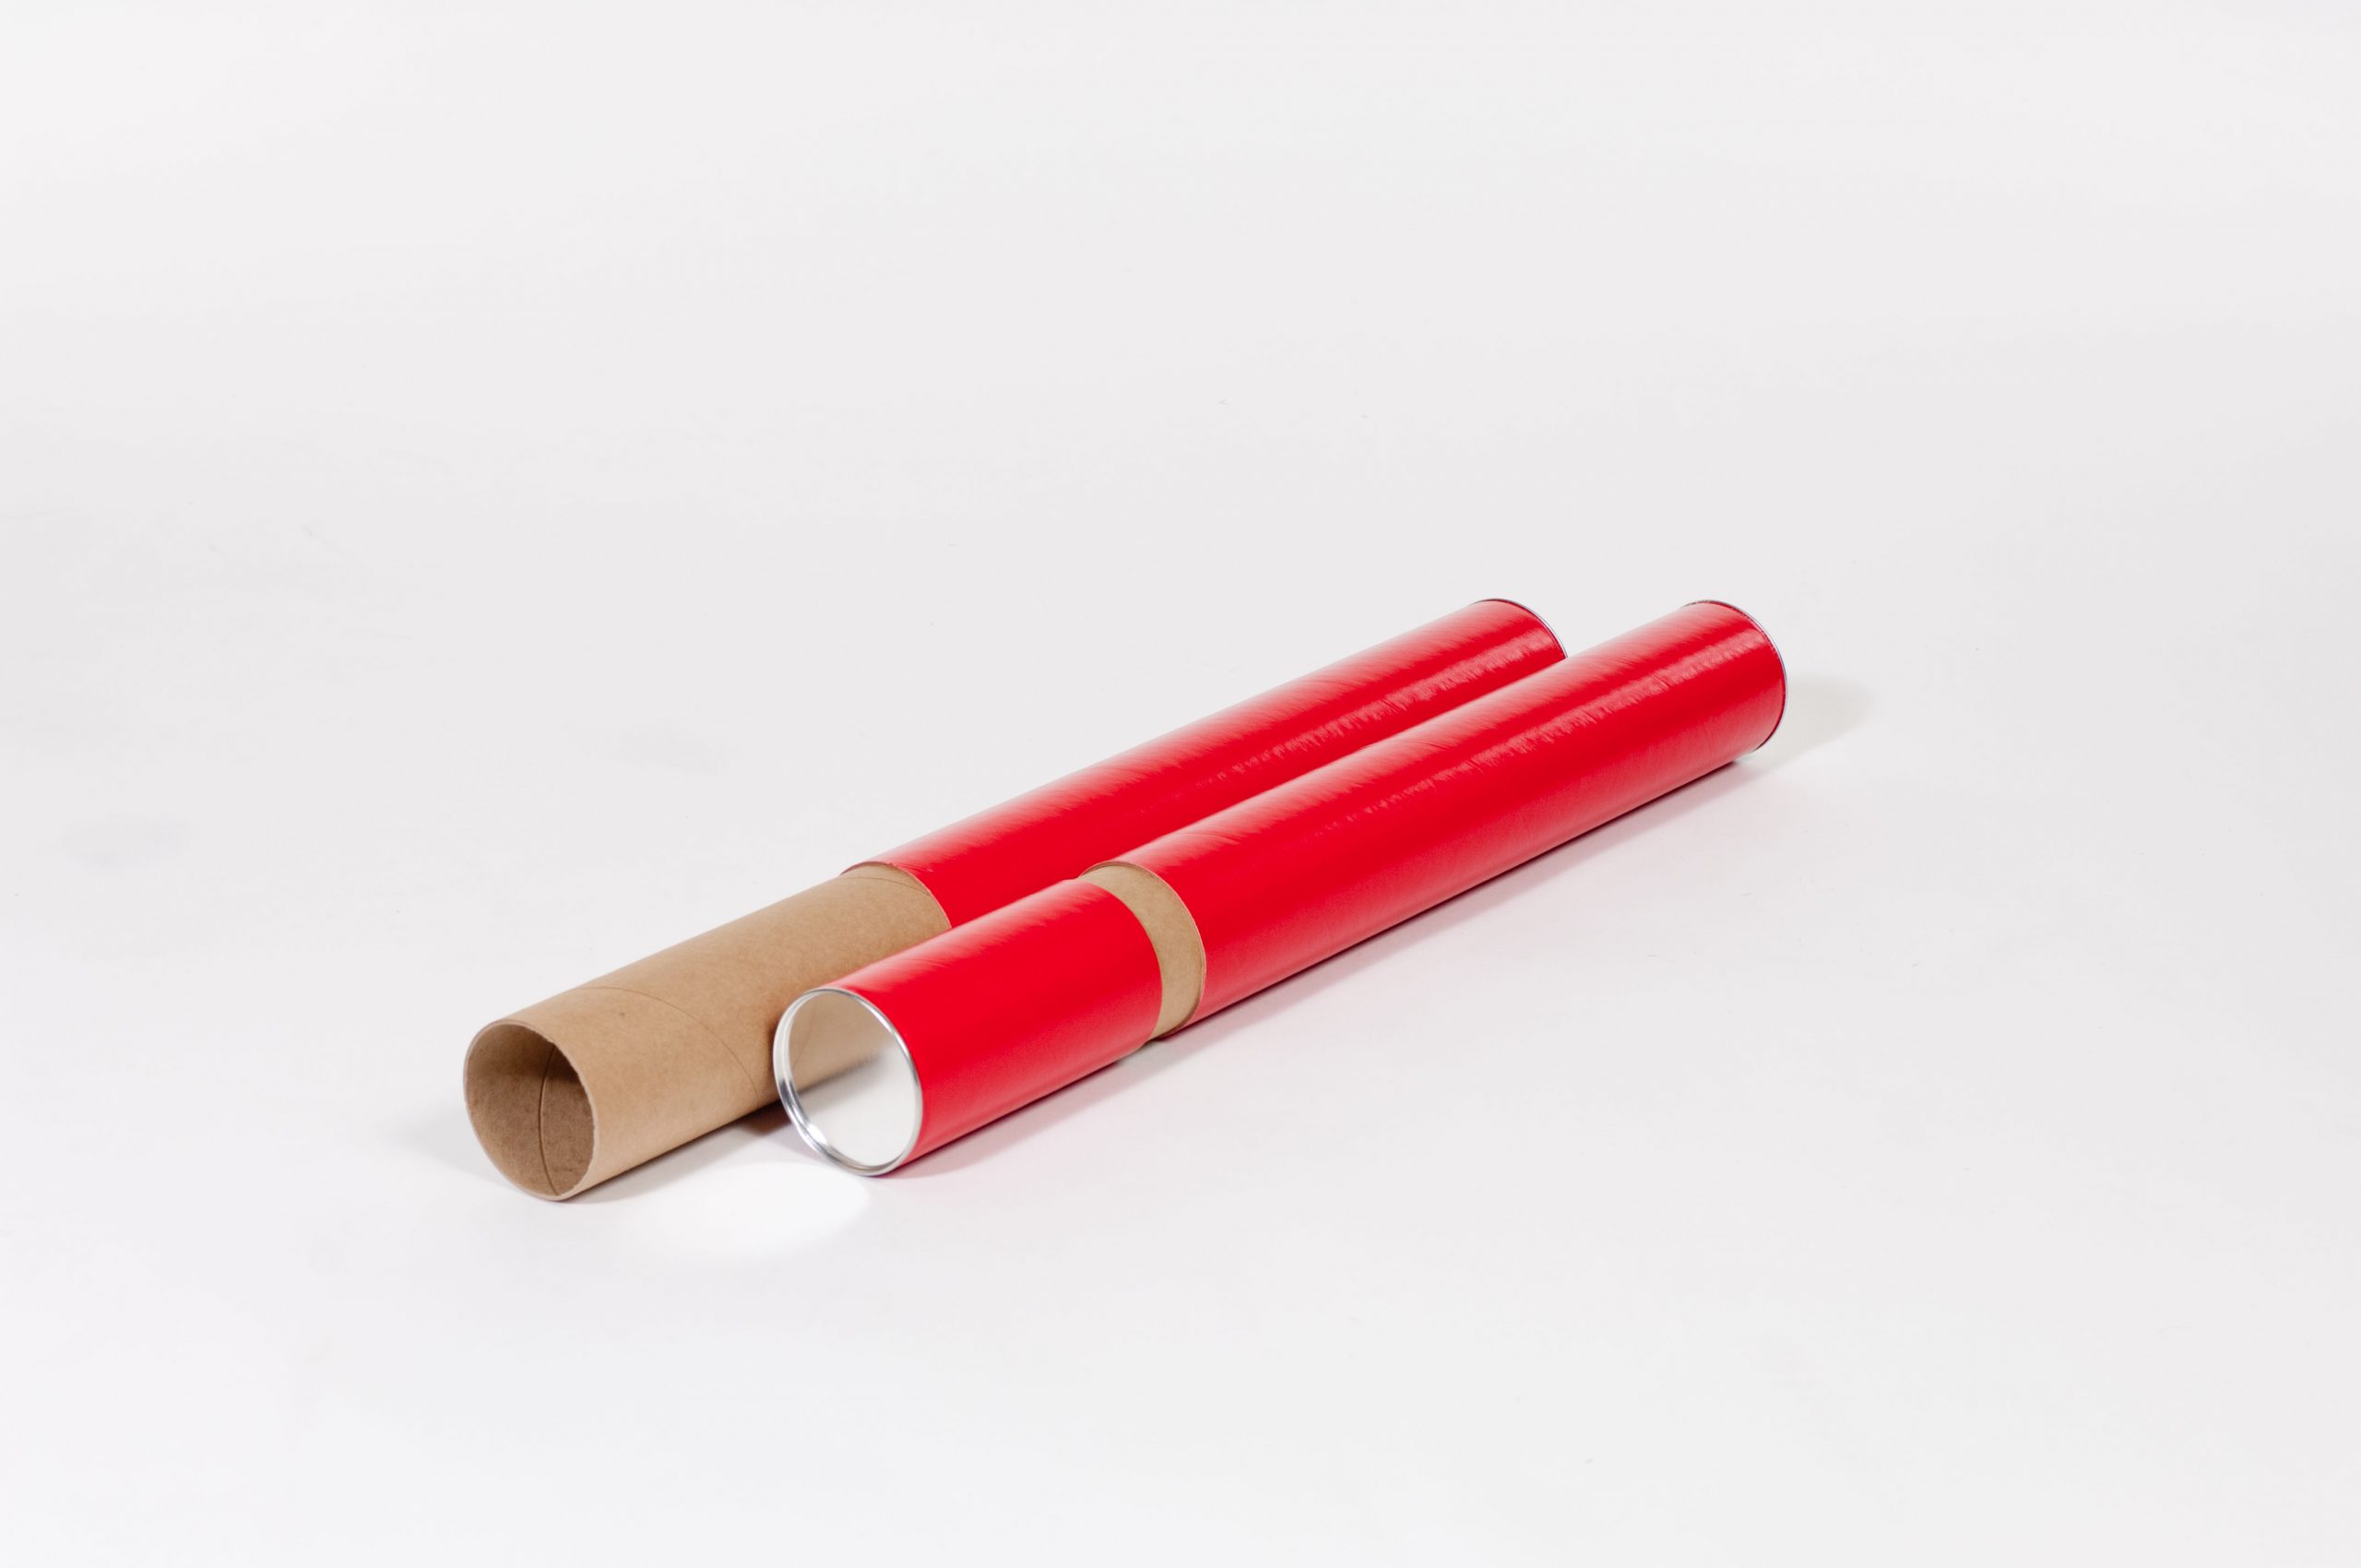 3x24" Red Telescoping Tube (24/Case) $75.83/piece - Packingstuff.com 3 Piece Red Telescoping Tube